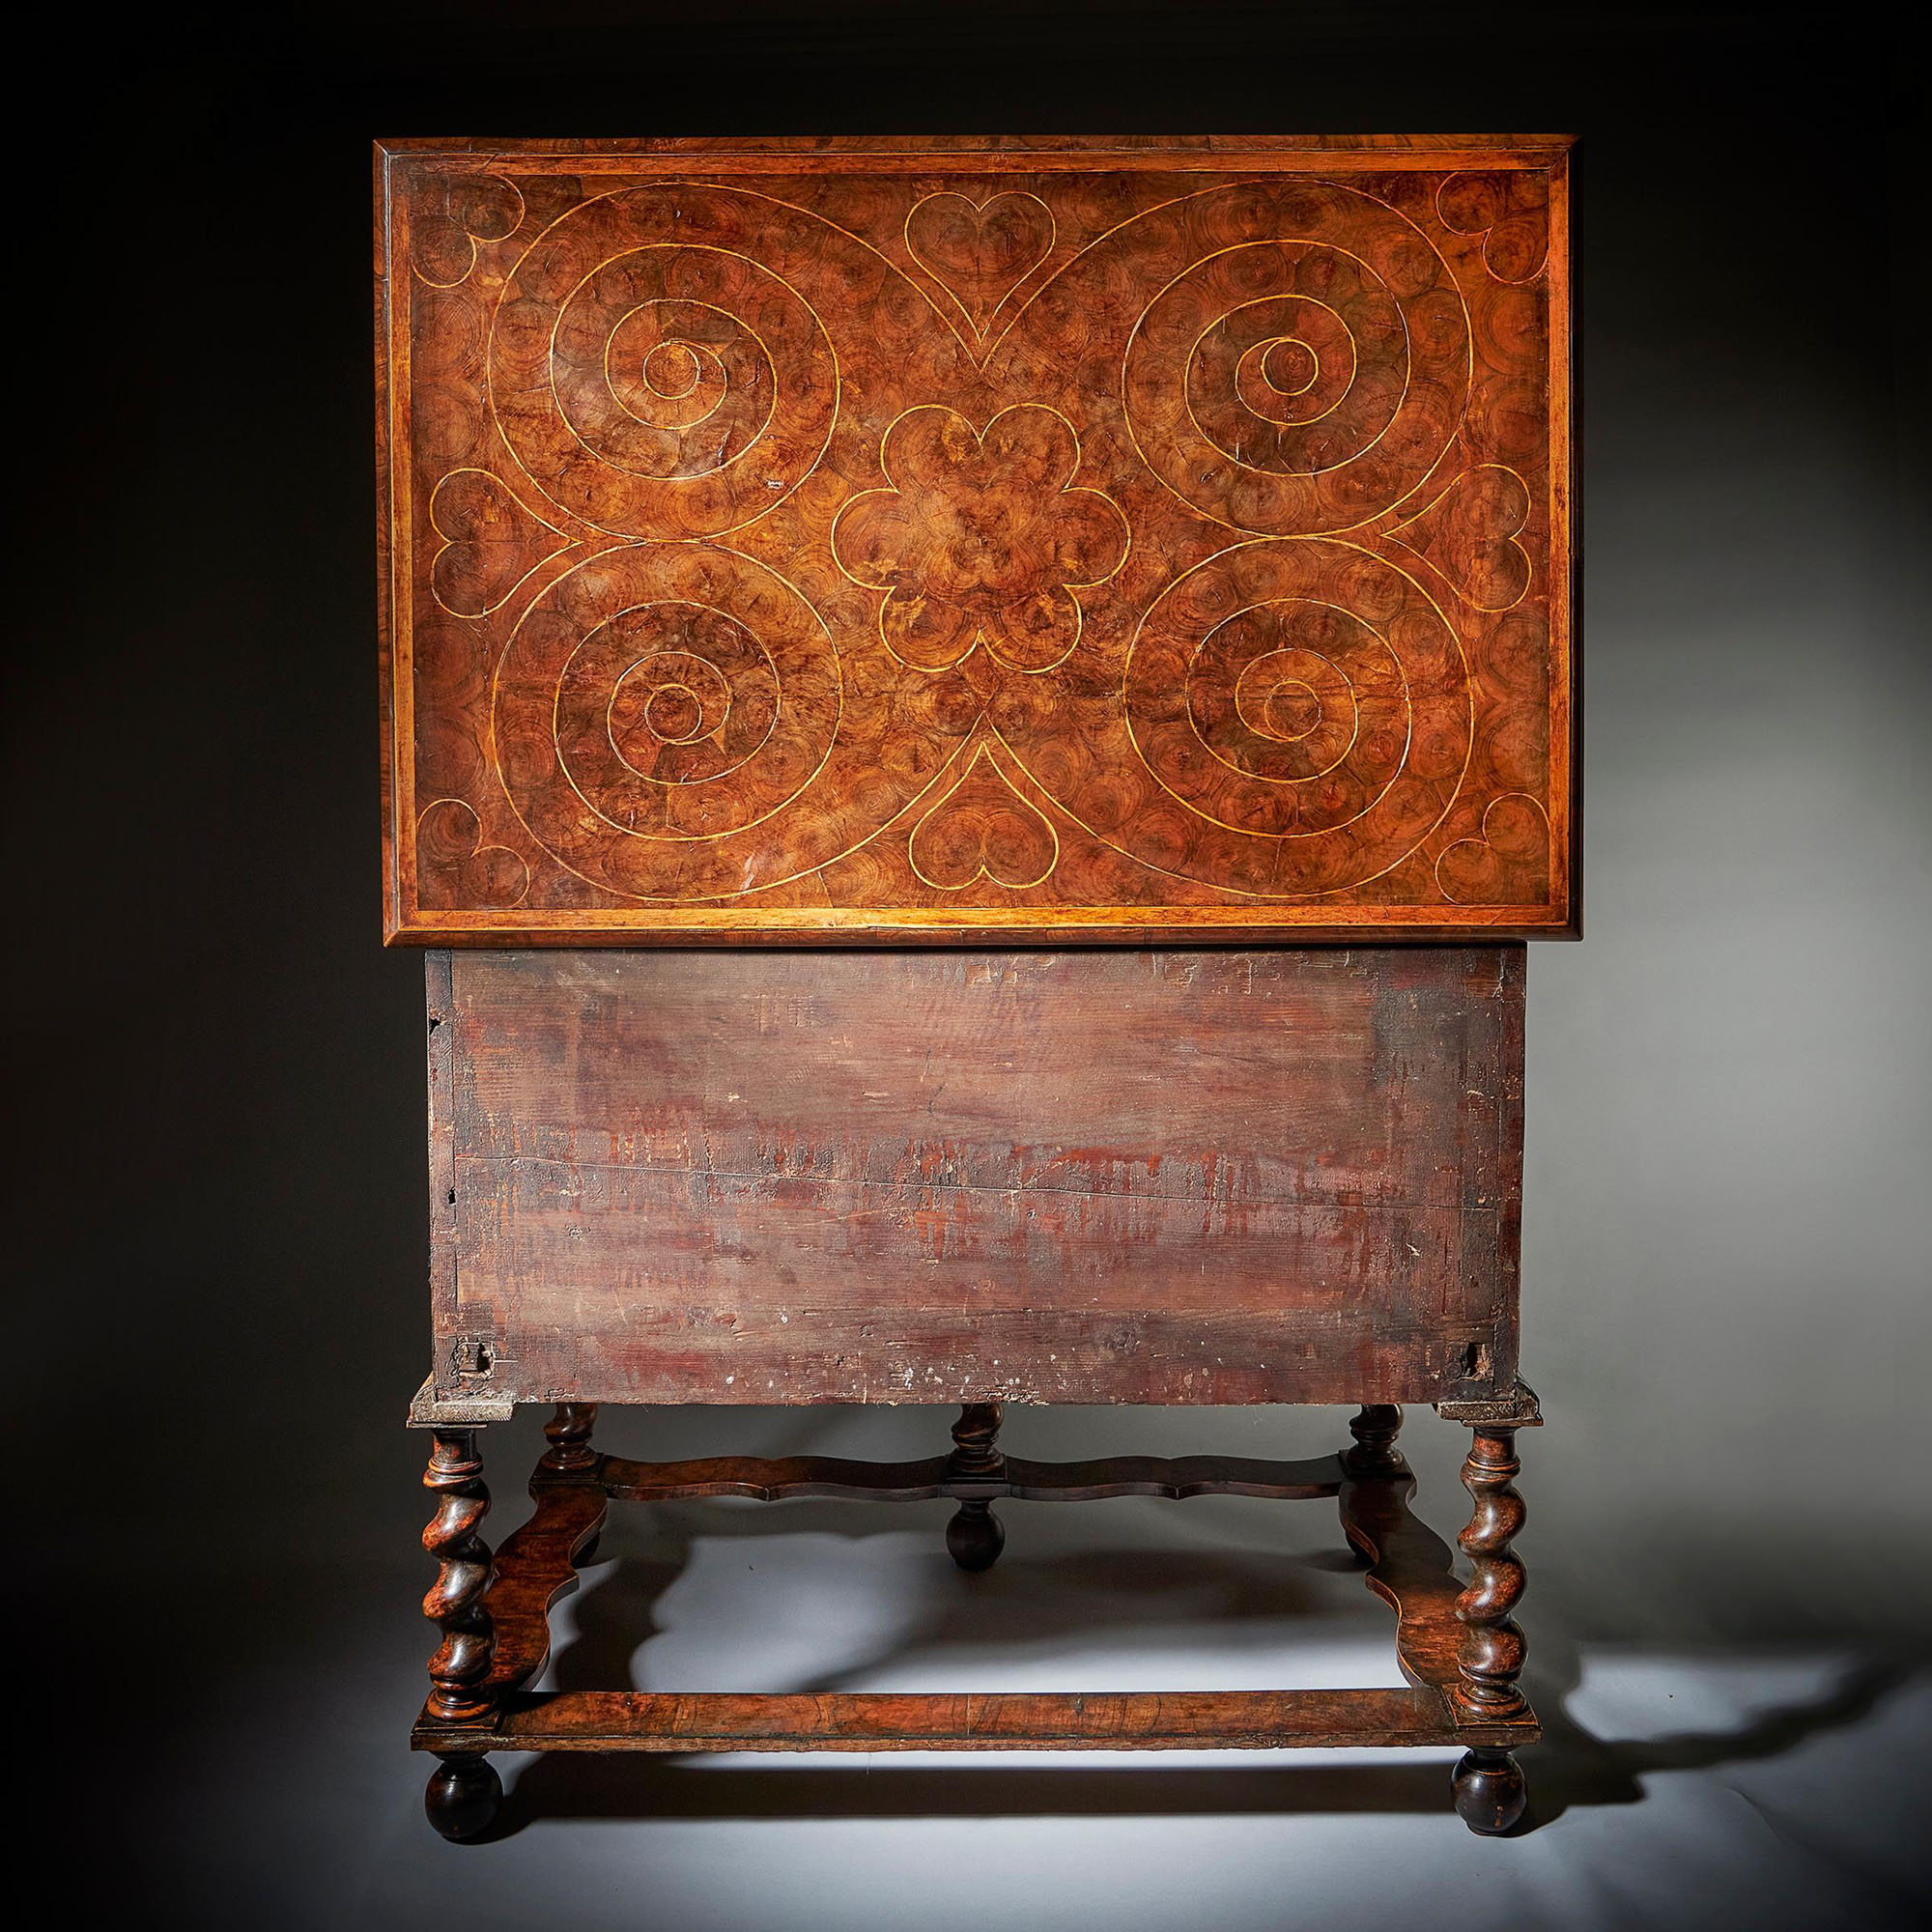 A fine and extremely rare 17th century William and Mary baroque olive oyster chest on stand or 'table box', circa 1675-1690. 3